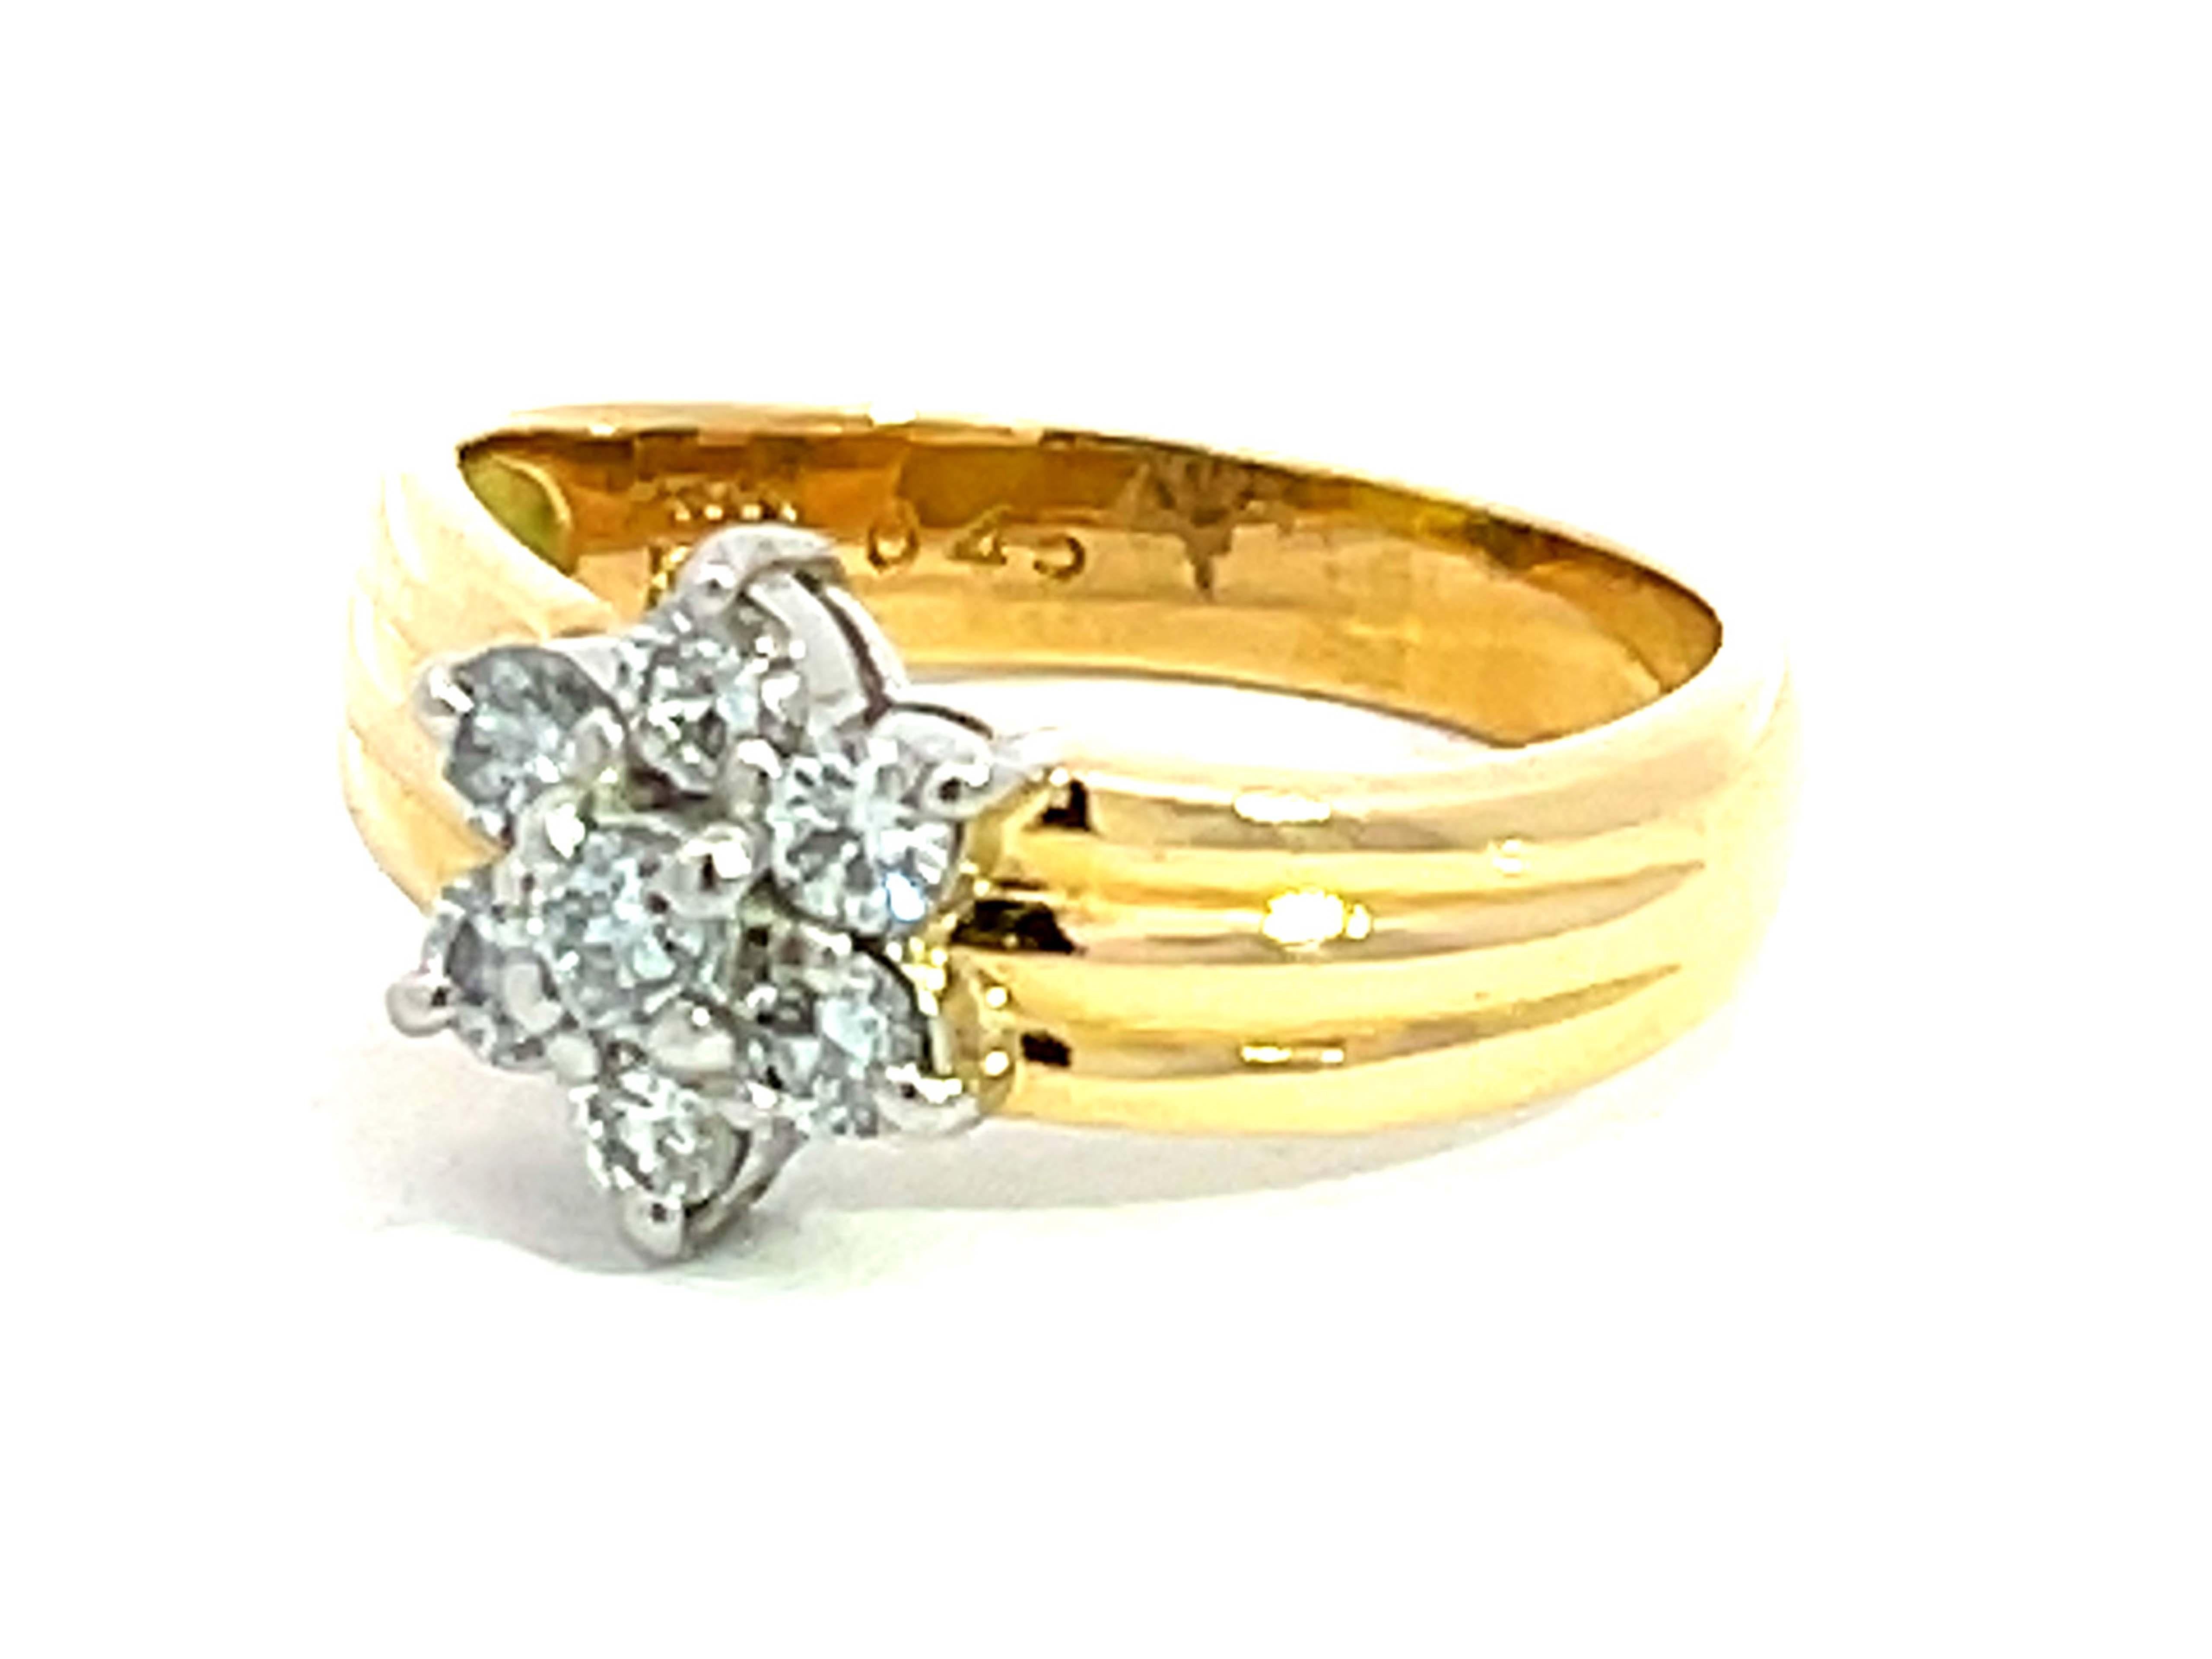 Diamond Flower Two Toned Ring in 18K Yellow Gold and Platinum In Excellent Condition For Sale In Honolulu, HI